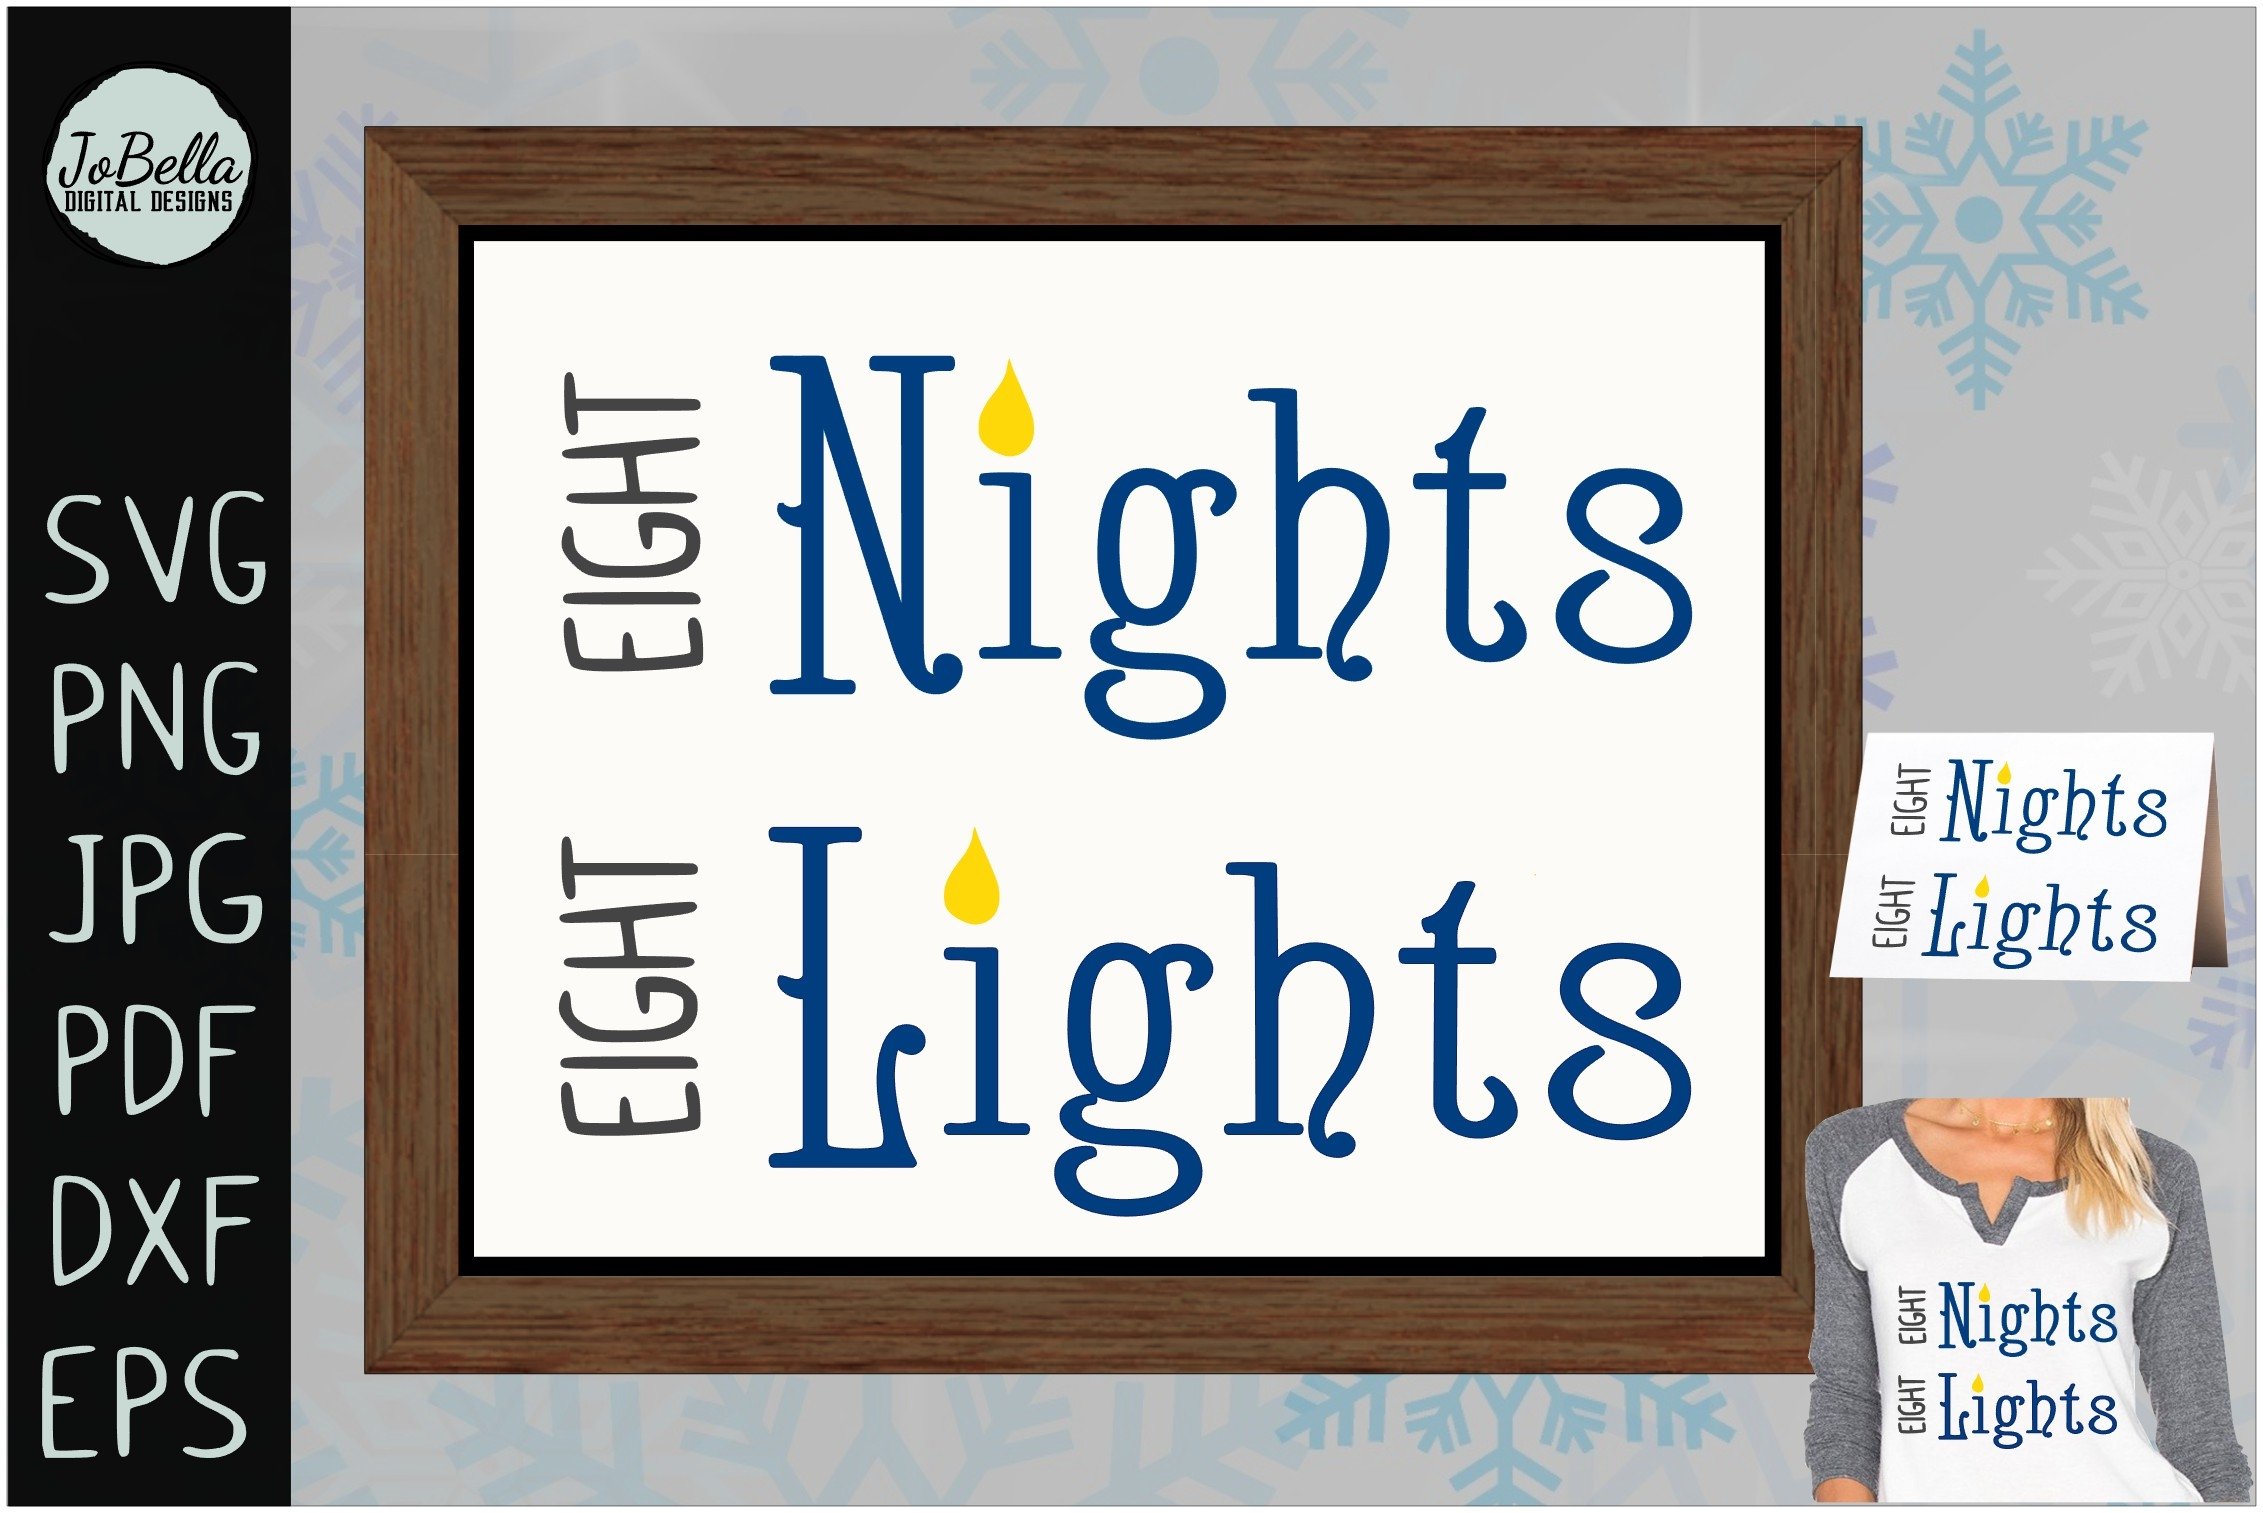 The lettering "Nights lights".